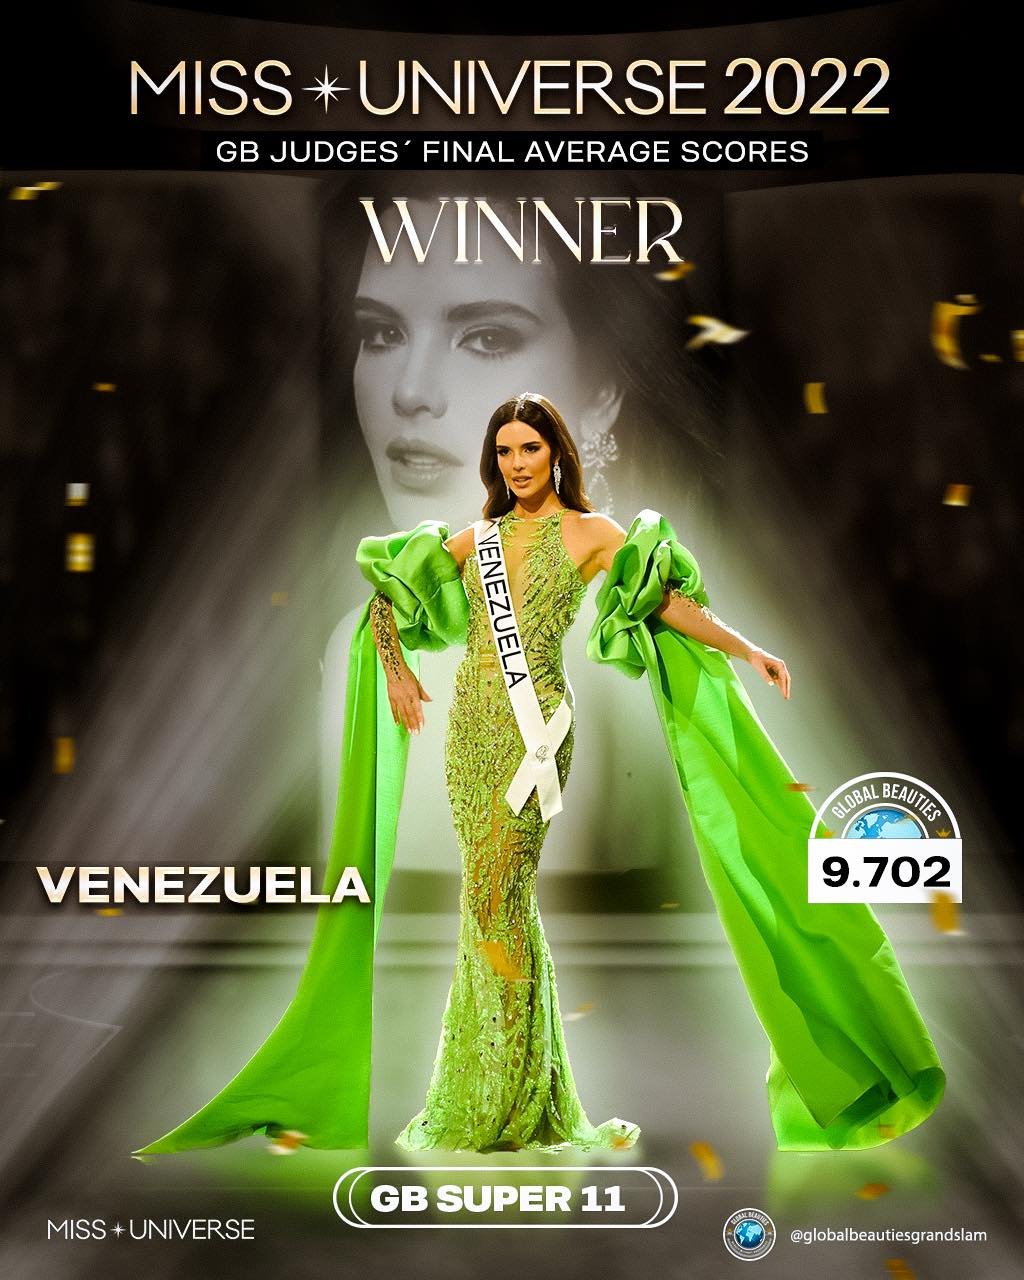 miss-universe-2022-will-be-crowned-tonight-venezuela-is-the-favorite